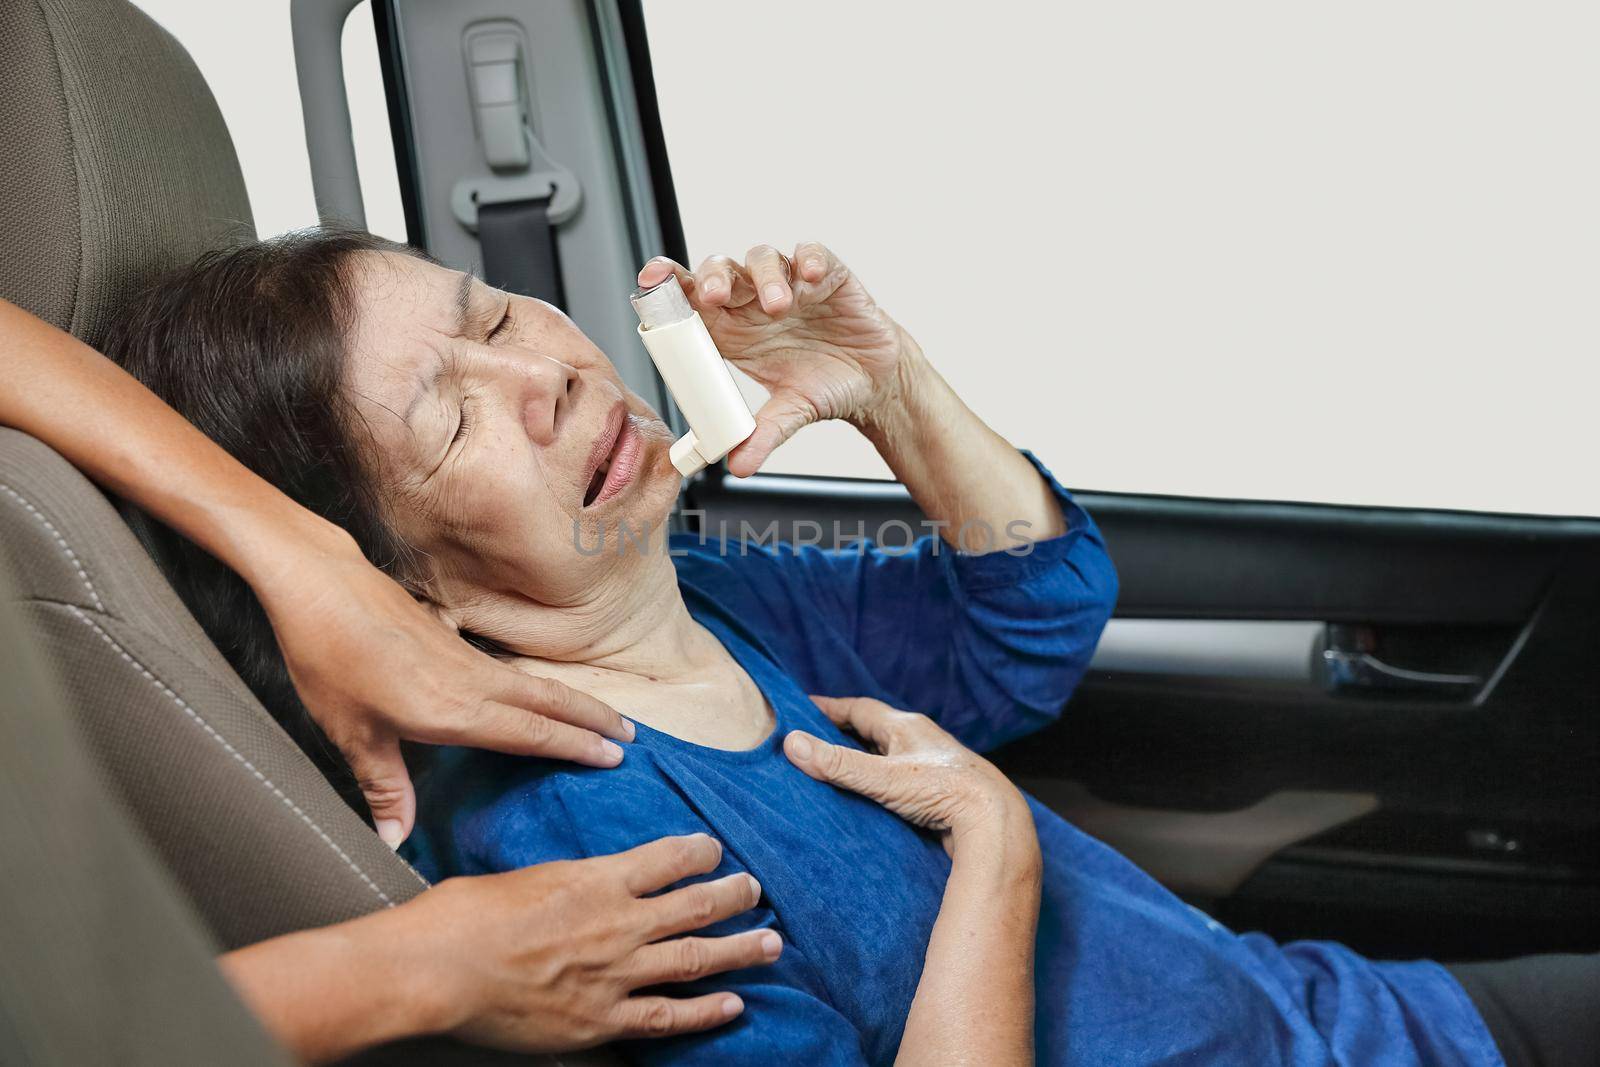 Elderly woman choking and holding an asthma spray inside car on the way by toa55